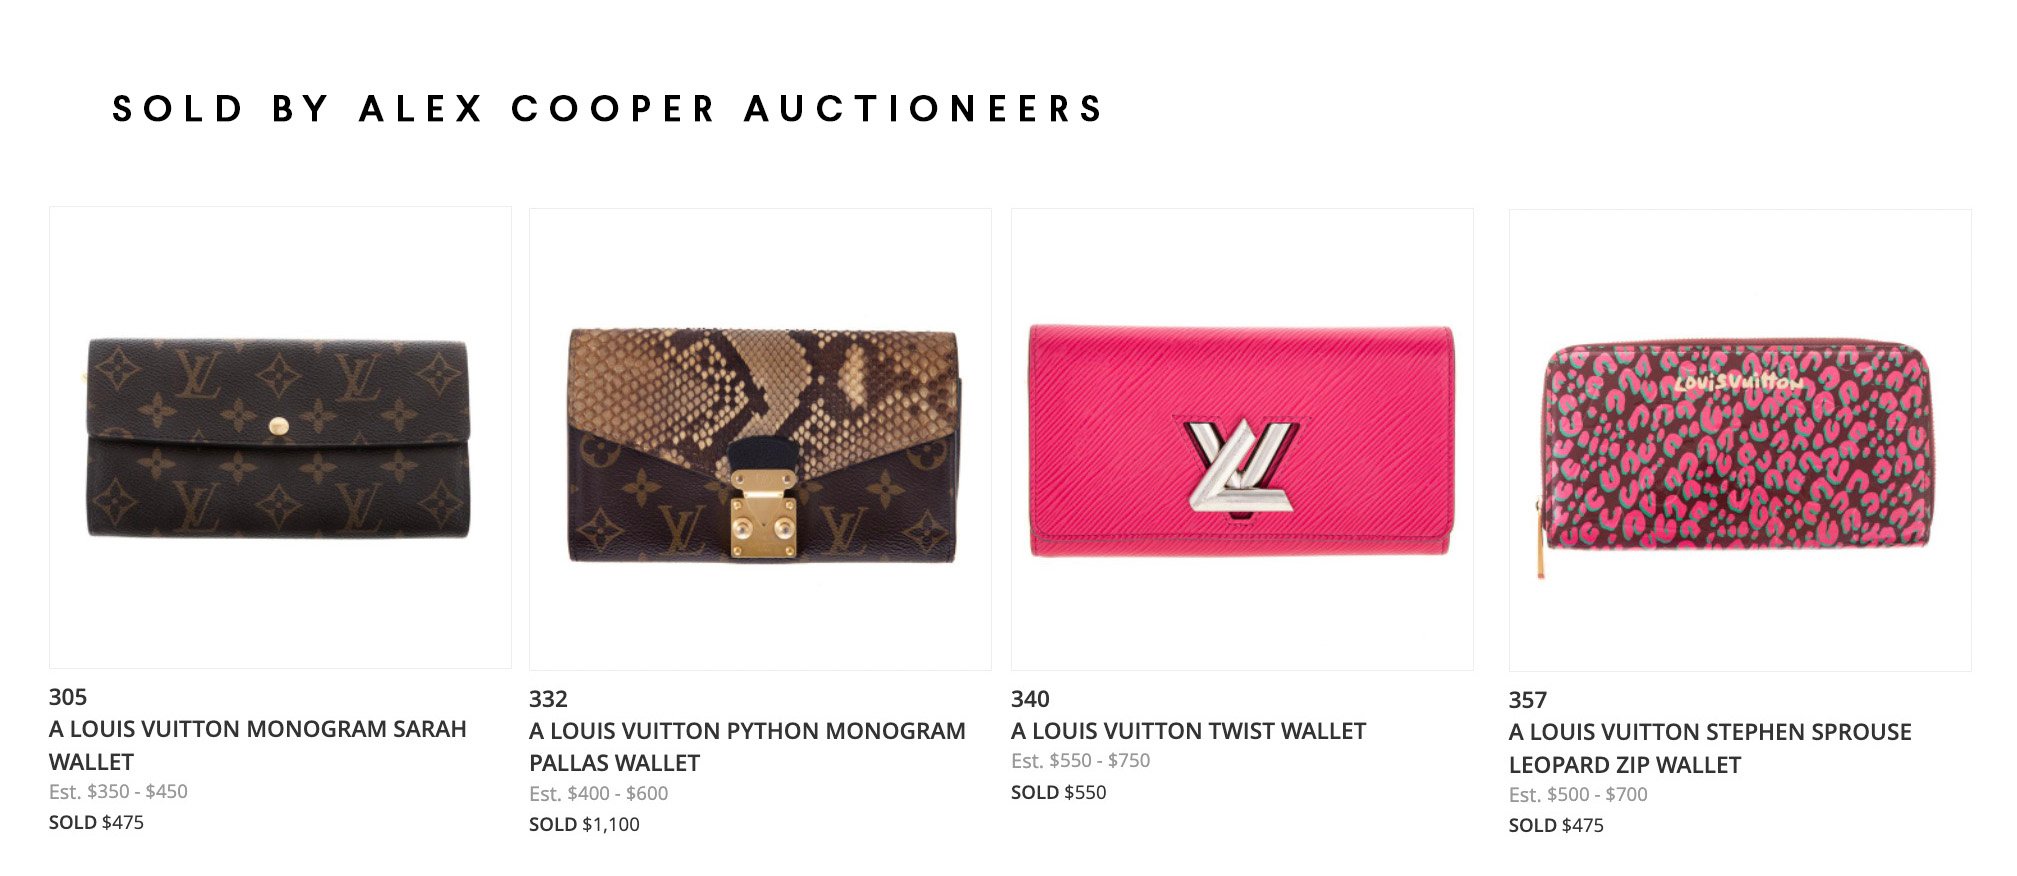 Best place to sell LV Brazza wallet? : r/Louisvuitton